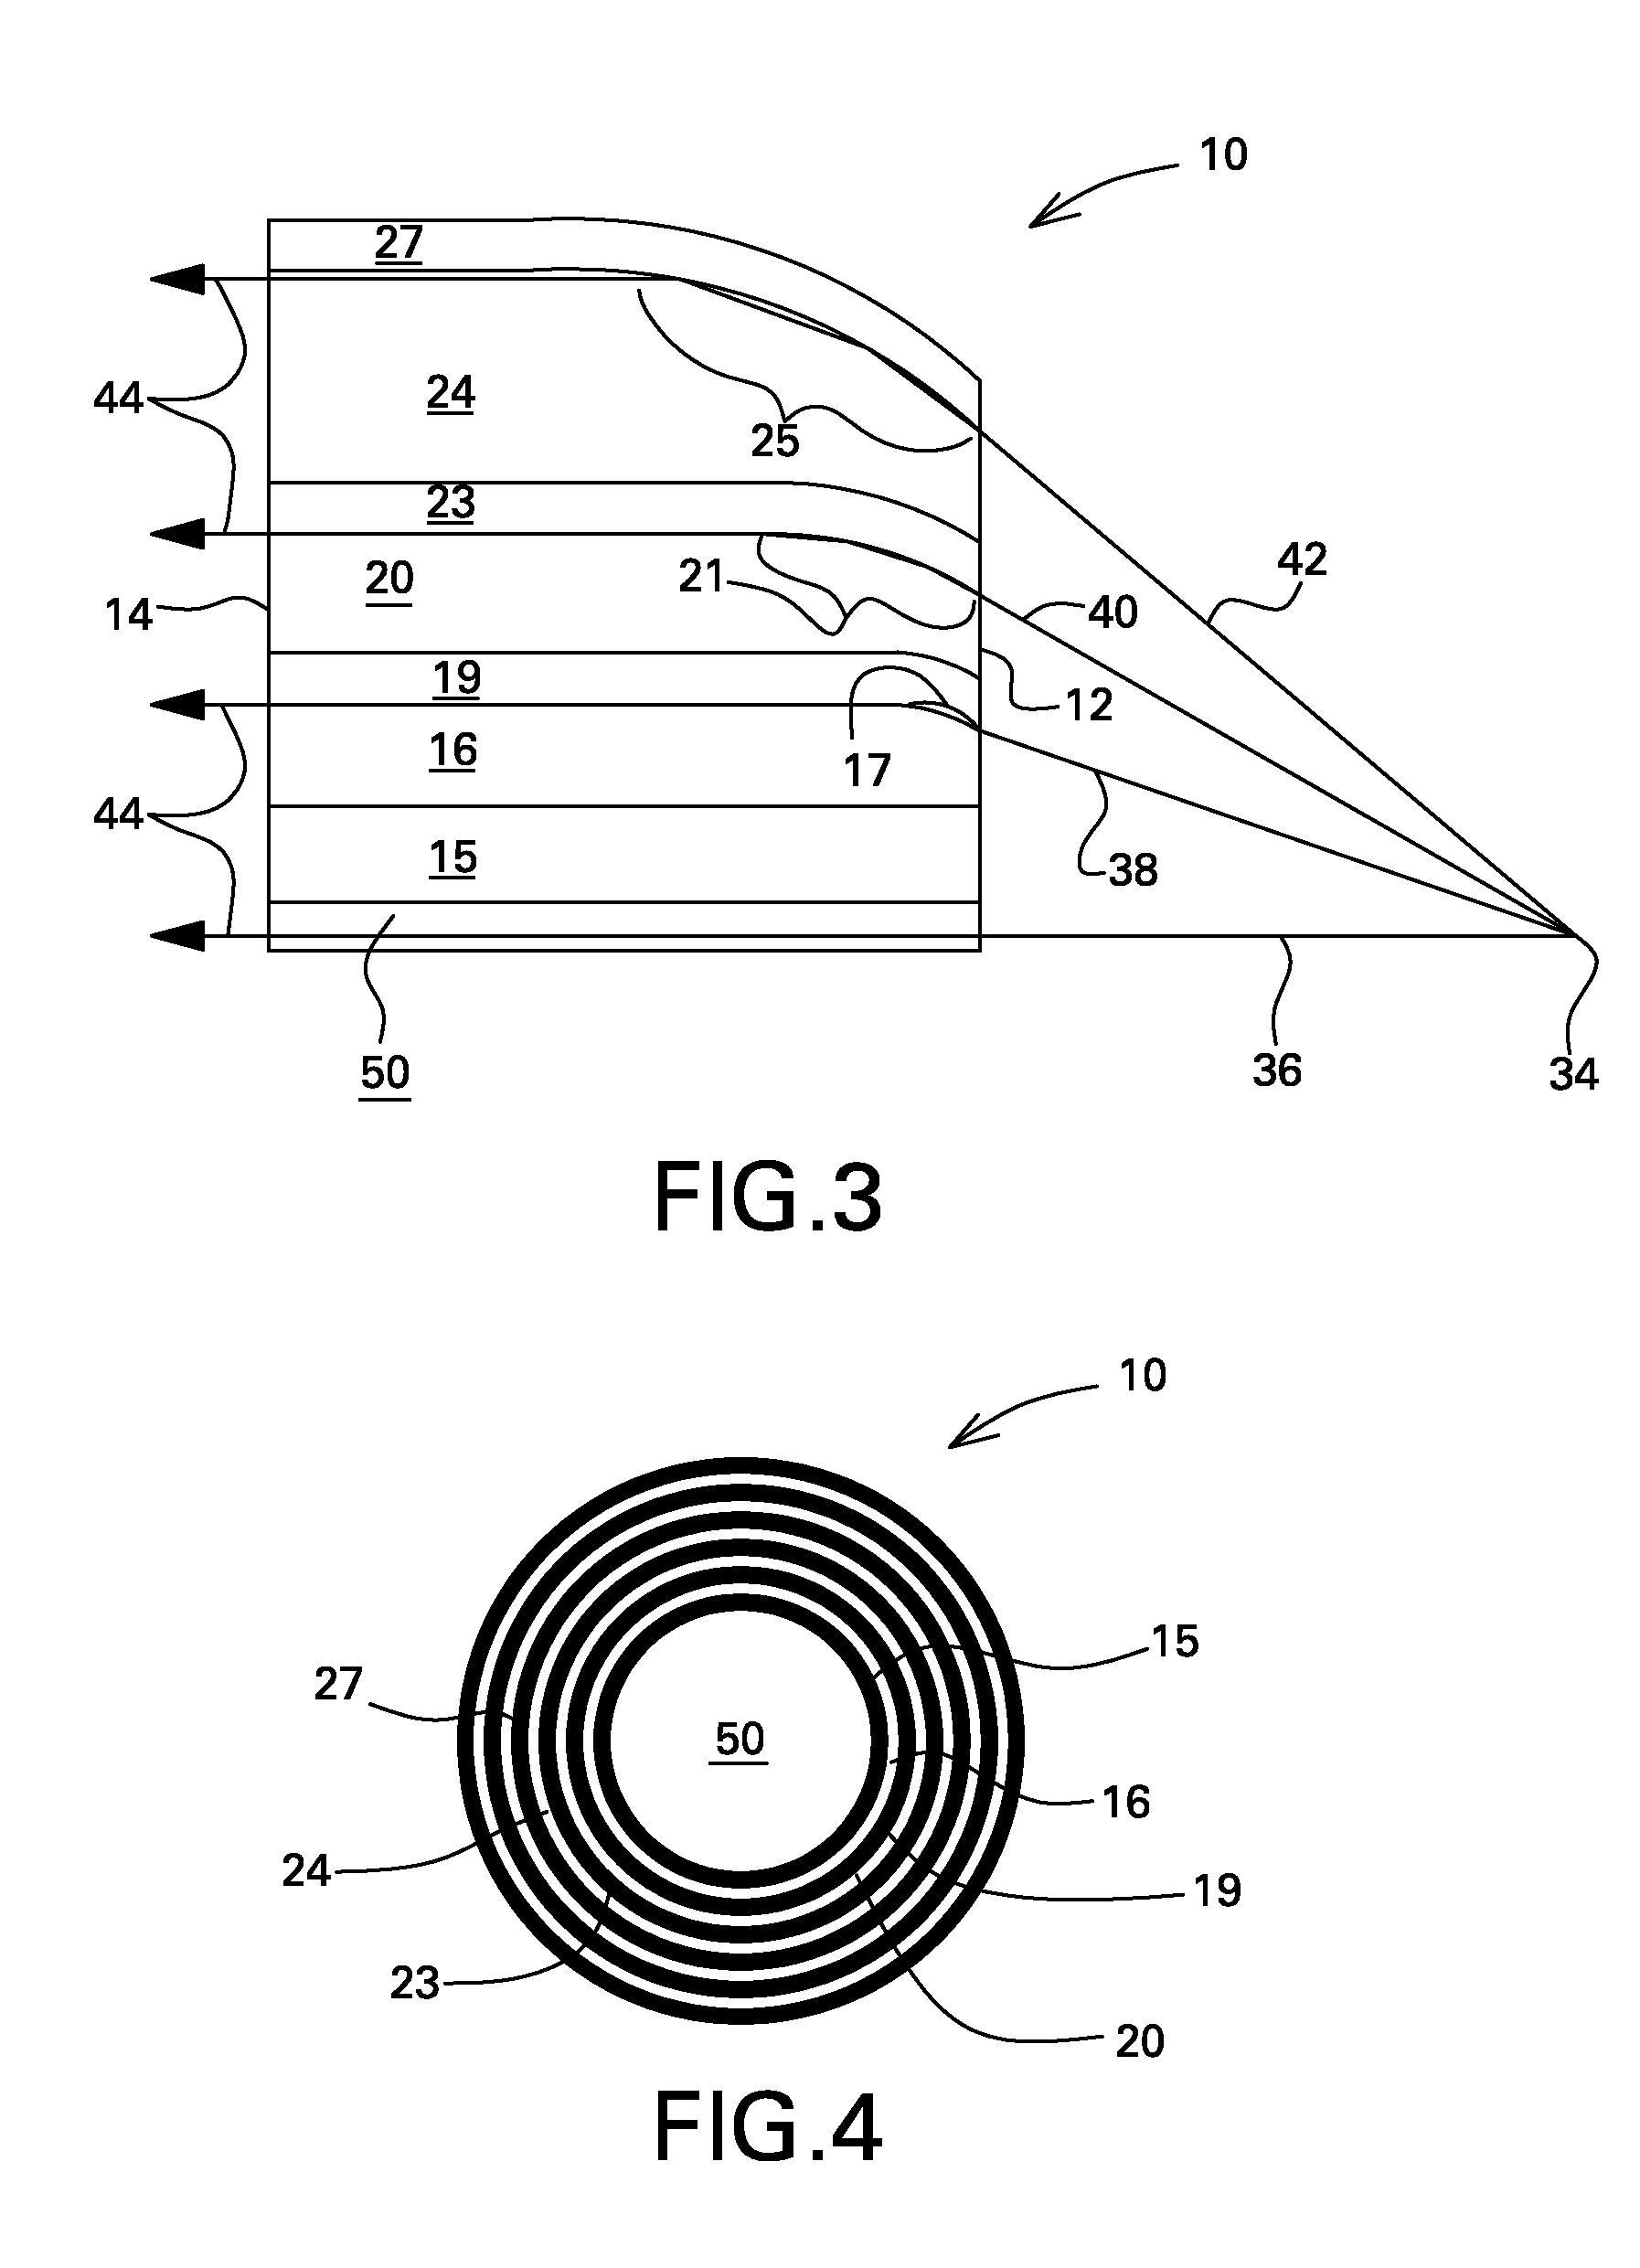 Multi-energy imaging system and method using optic devices